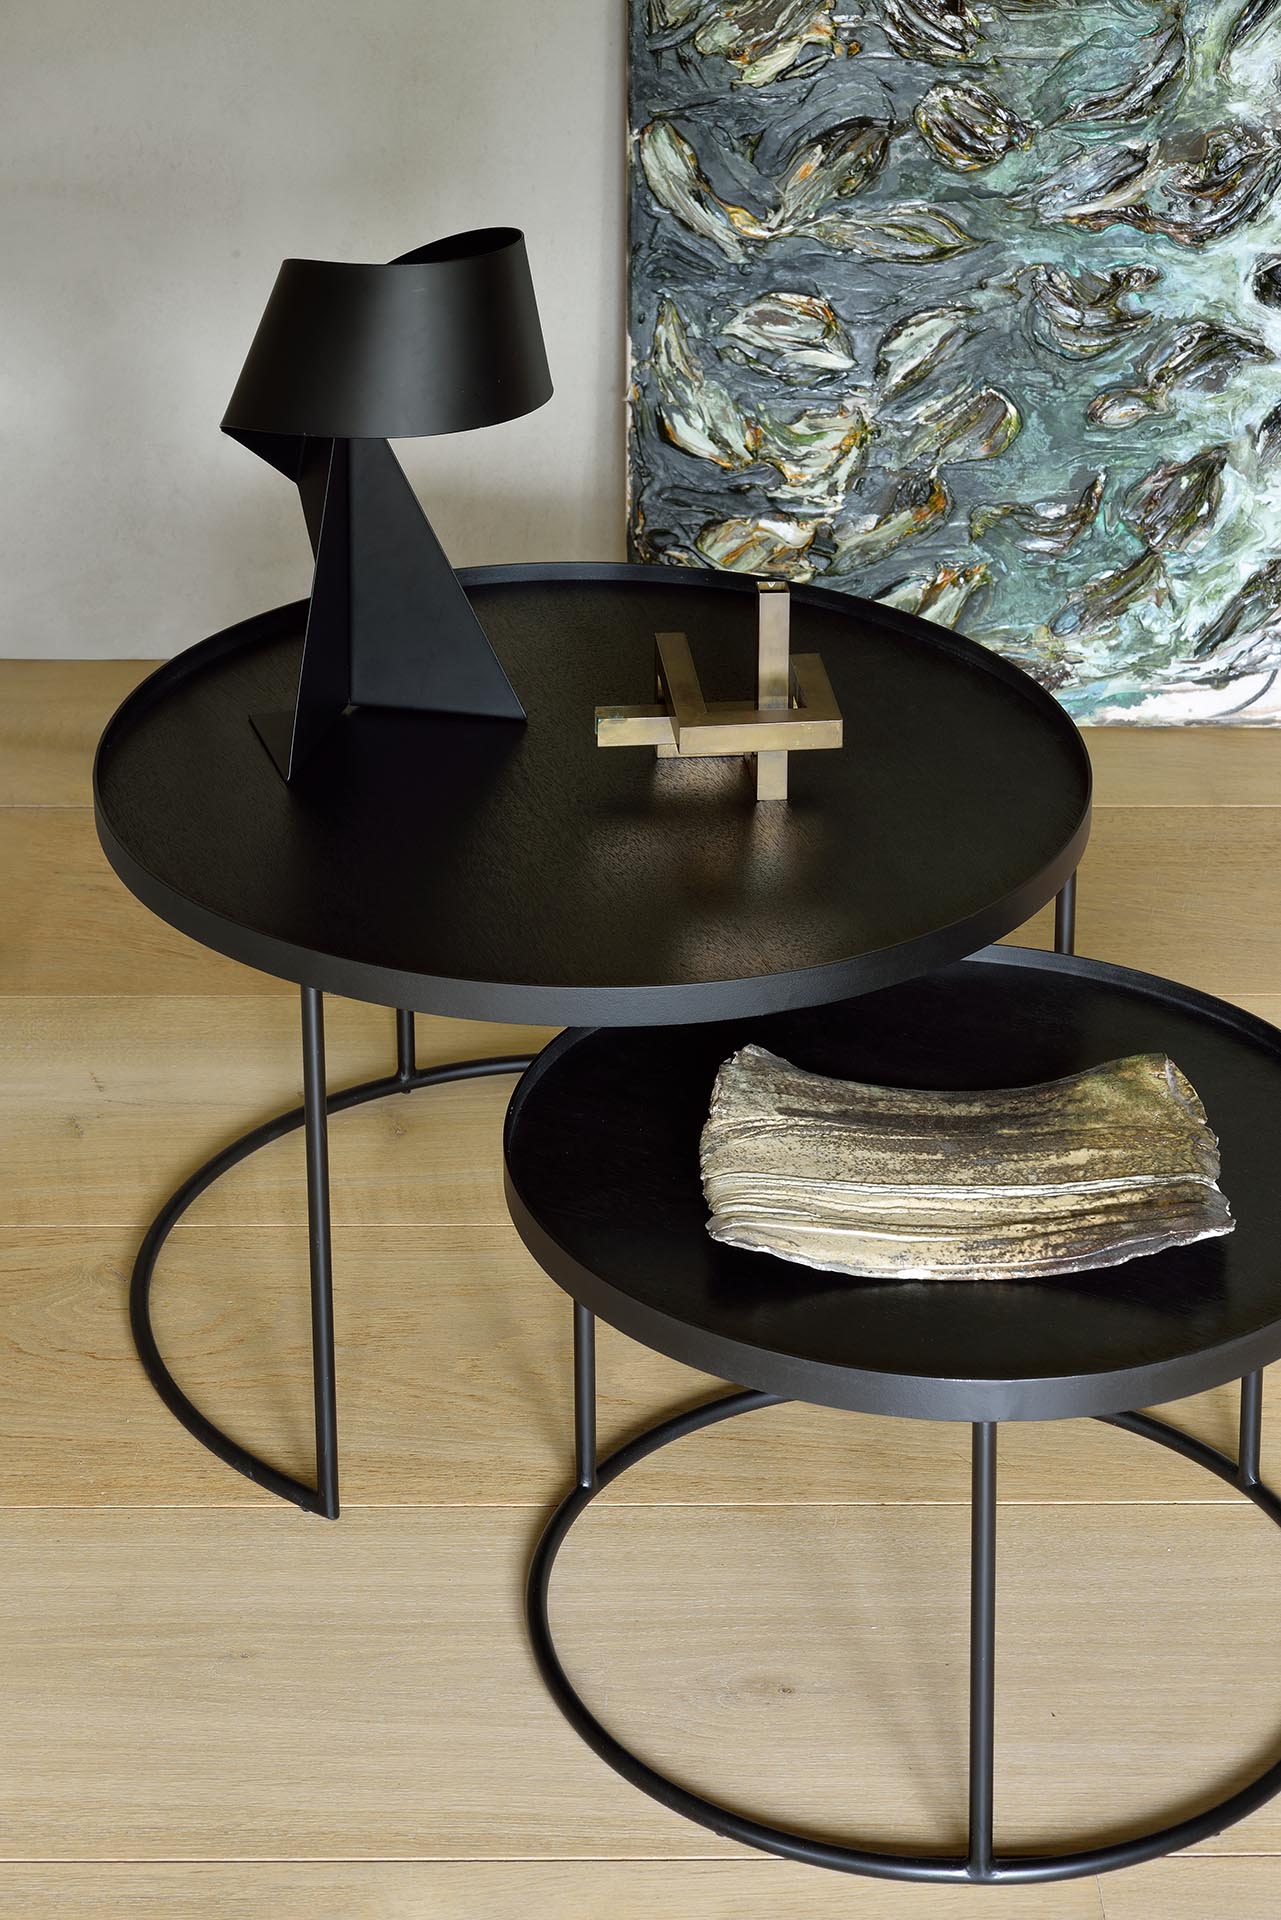 tray coffee table set by ethnicraft at adorn.house